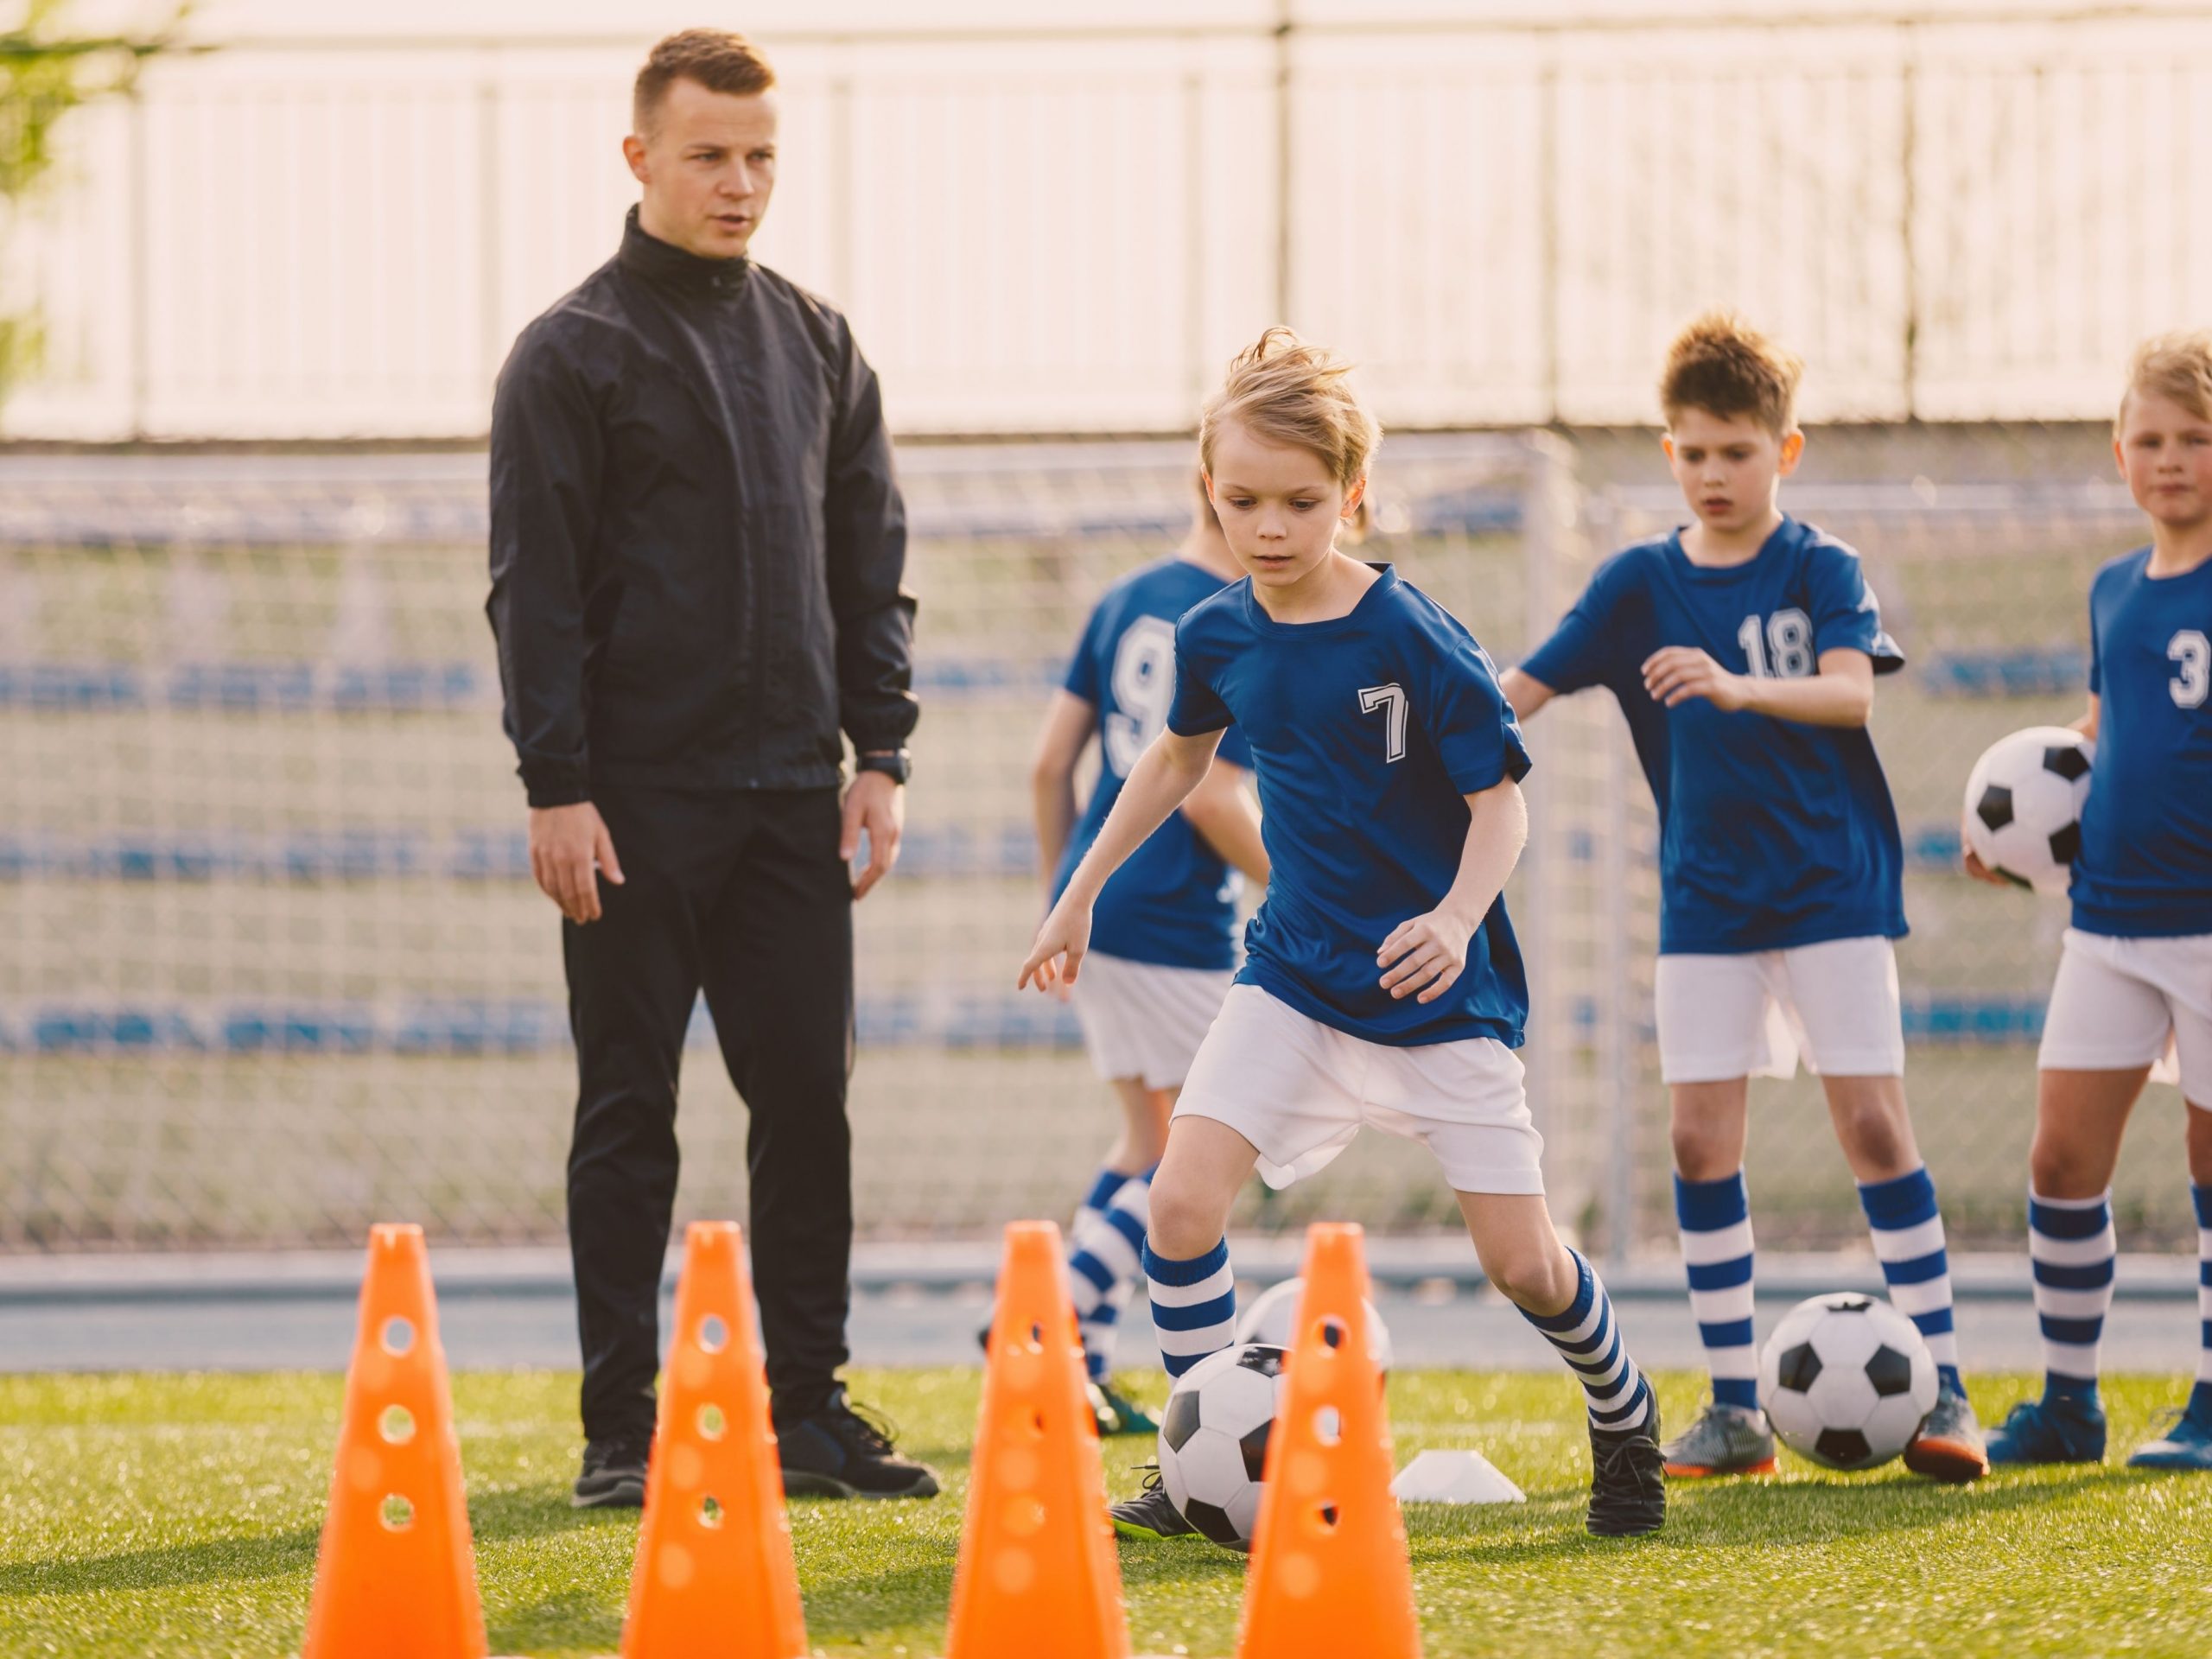 Adolescent athlete and common injuries